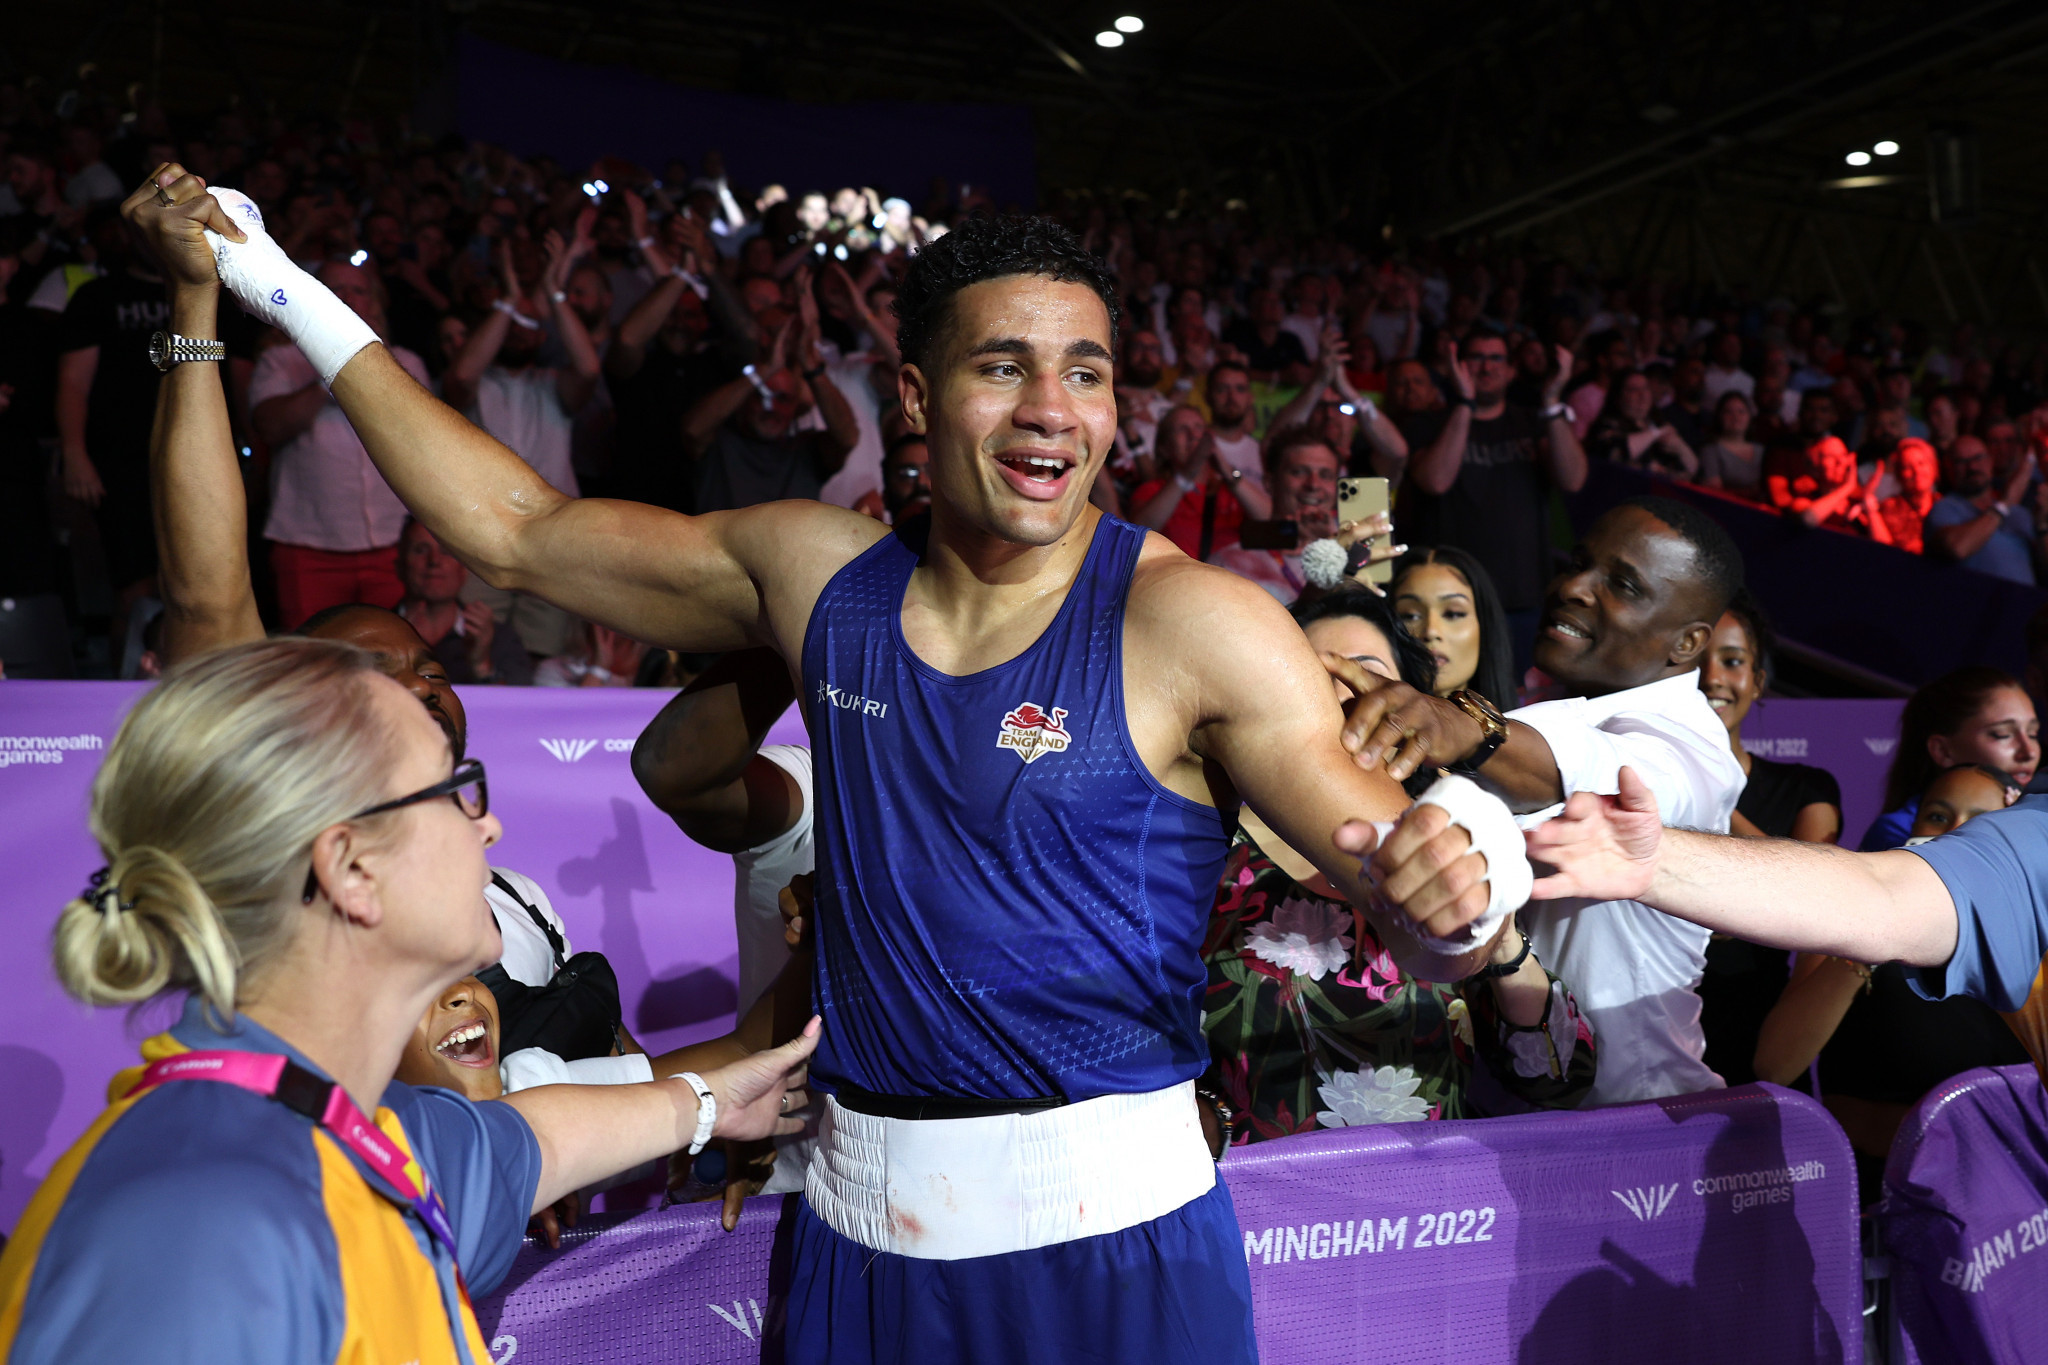 Home boy Orie ends boxing finals on inspirational note at Birmingham 2022 with gold